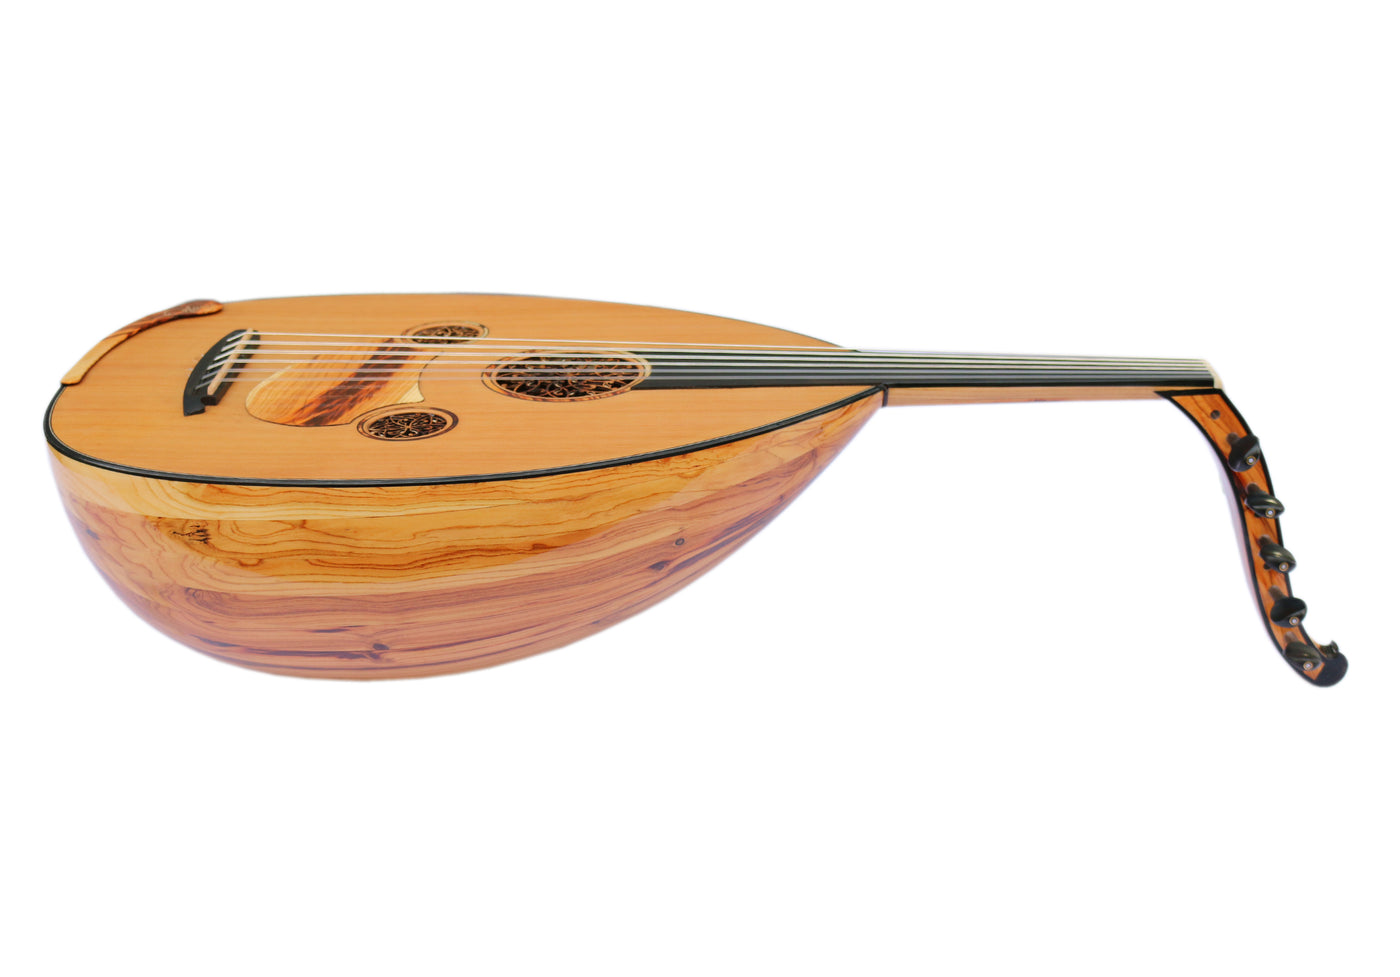 Special Turkish Oud Apricot Wood MRS-11 By Miras